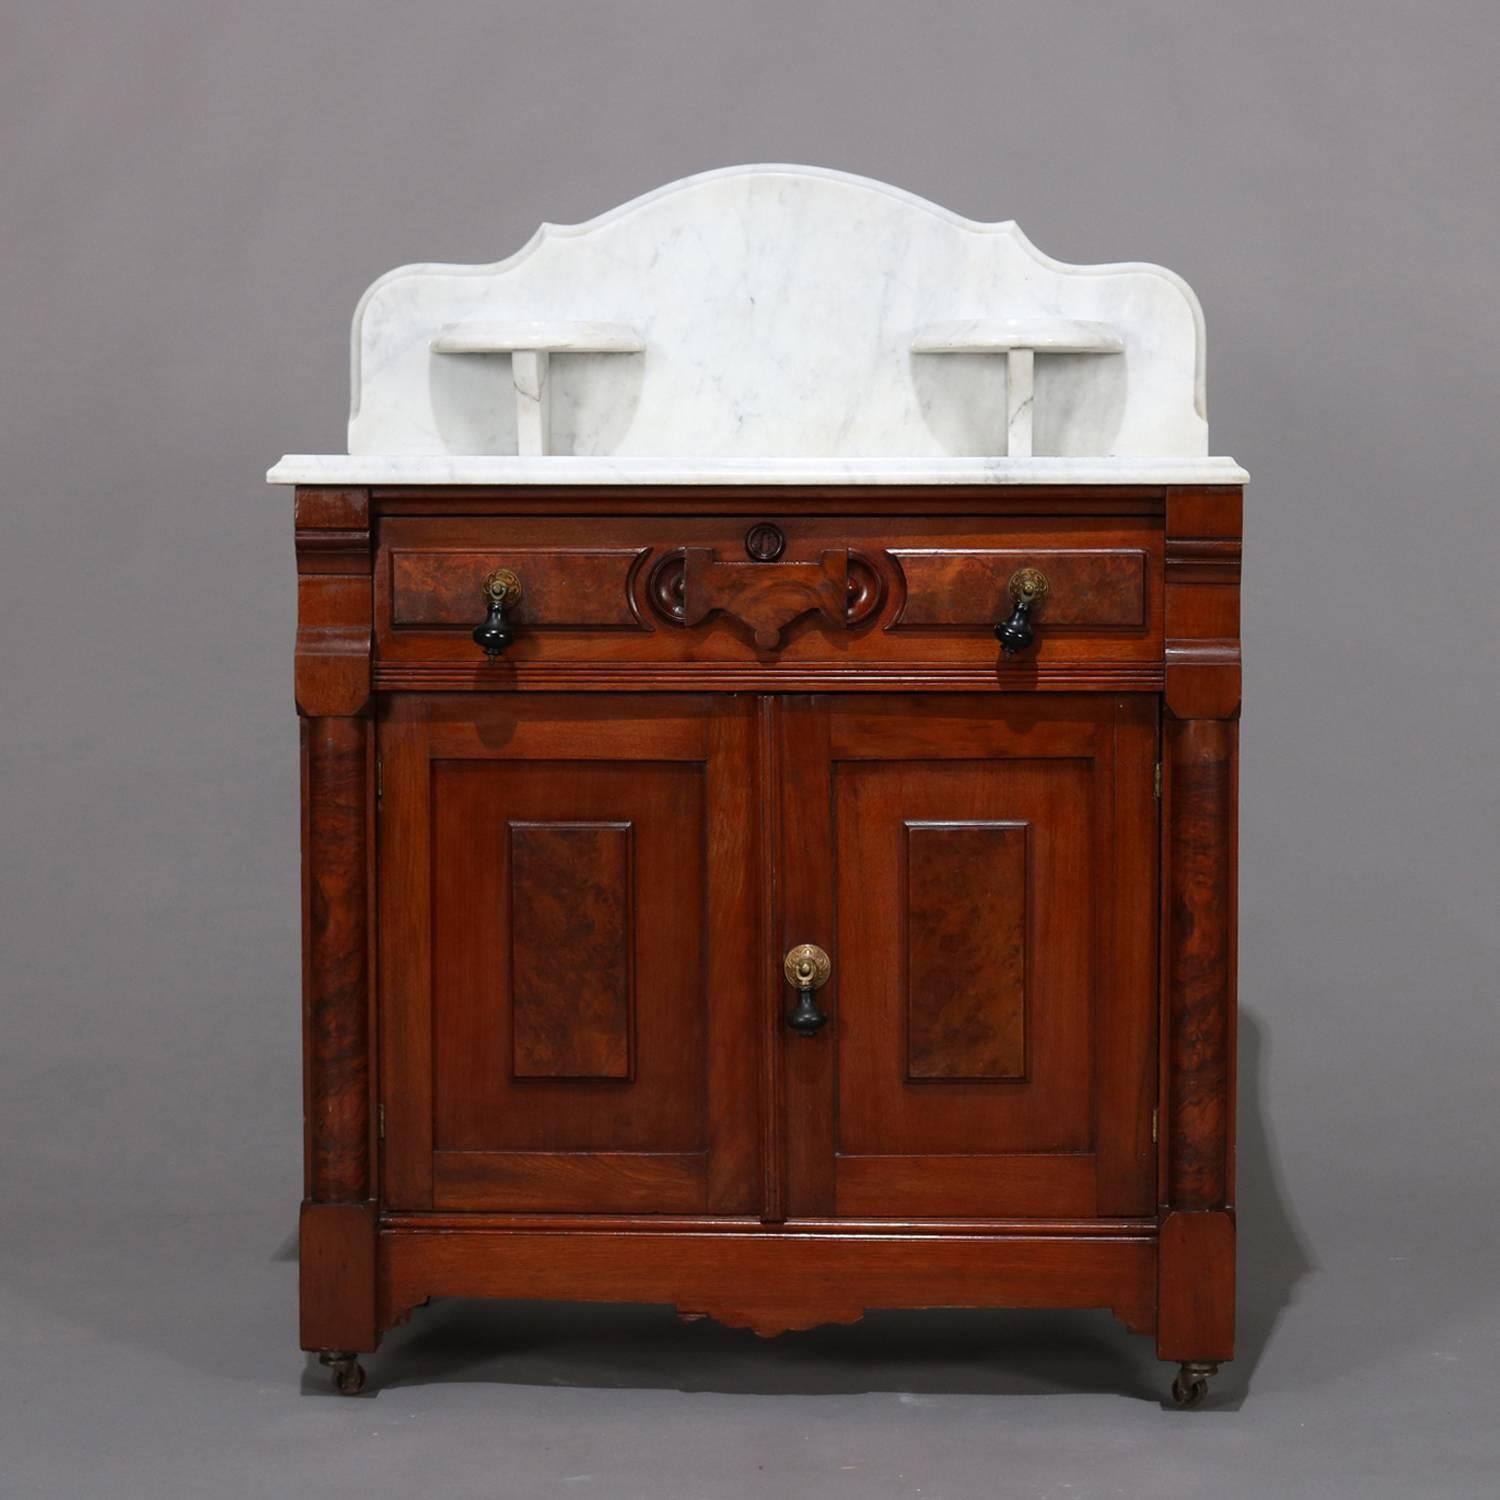 antique wash stand with marble top